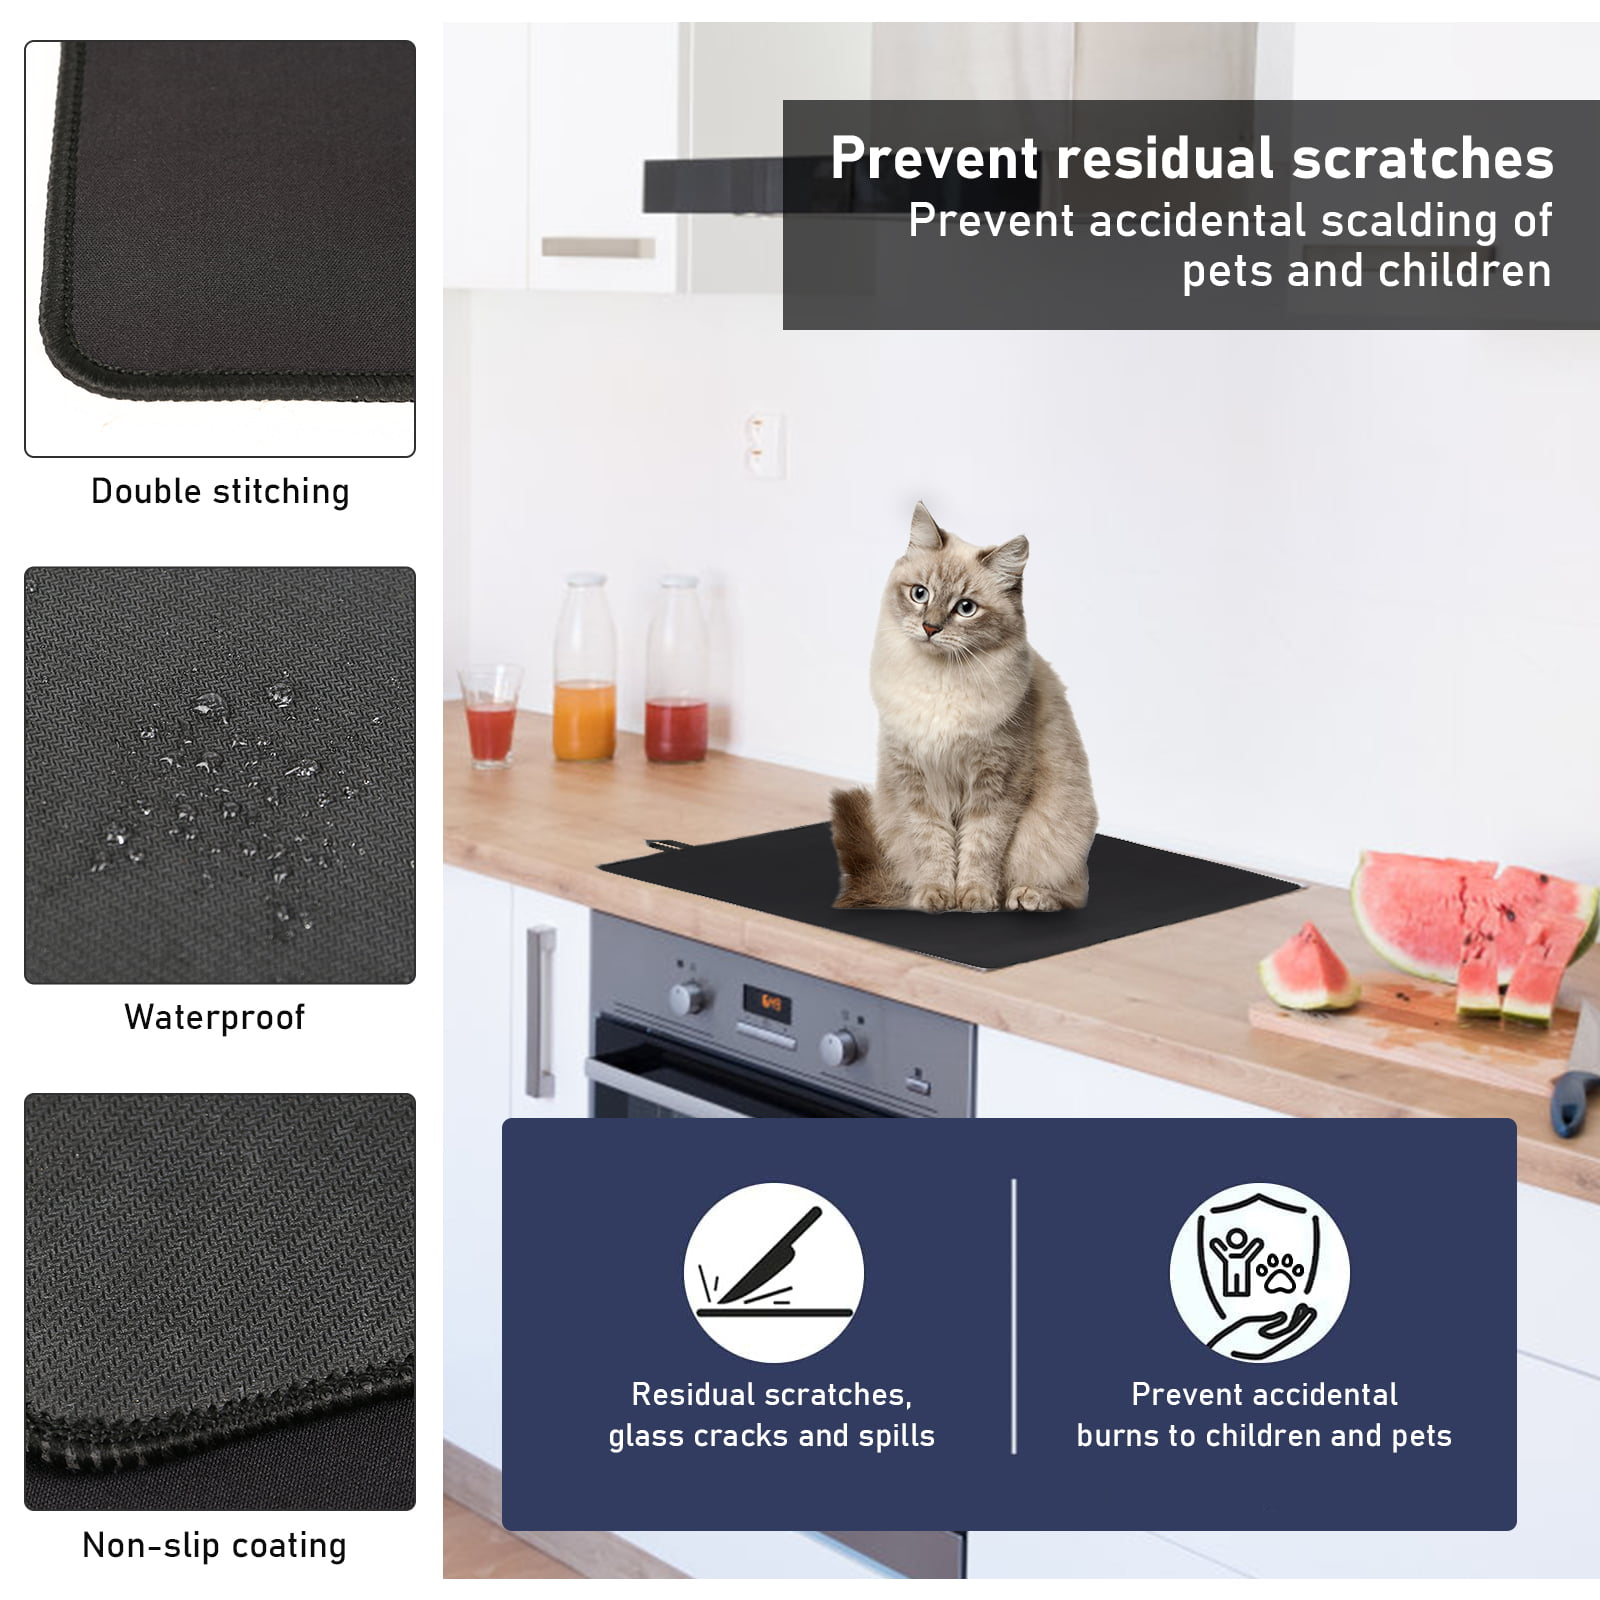 Natural Rubber Panel Protector,Glass Top Stove Cover Protector,Electric Stove Cover,Prevent Scratch,Expand Usage Space,Thickened and Non-Slip